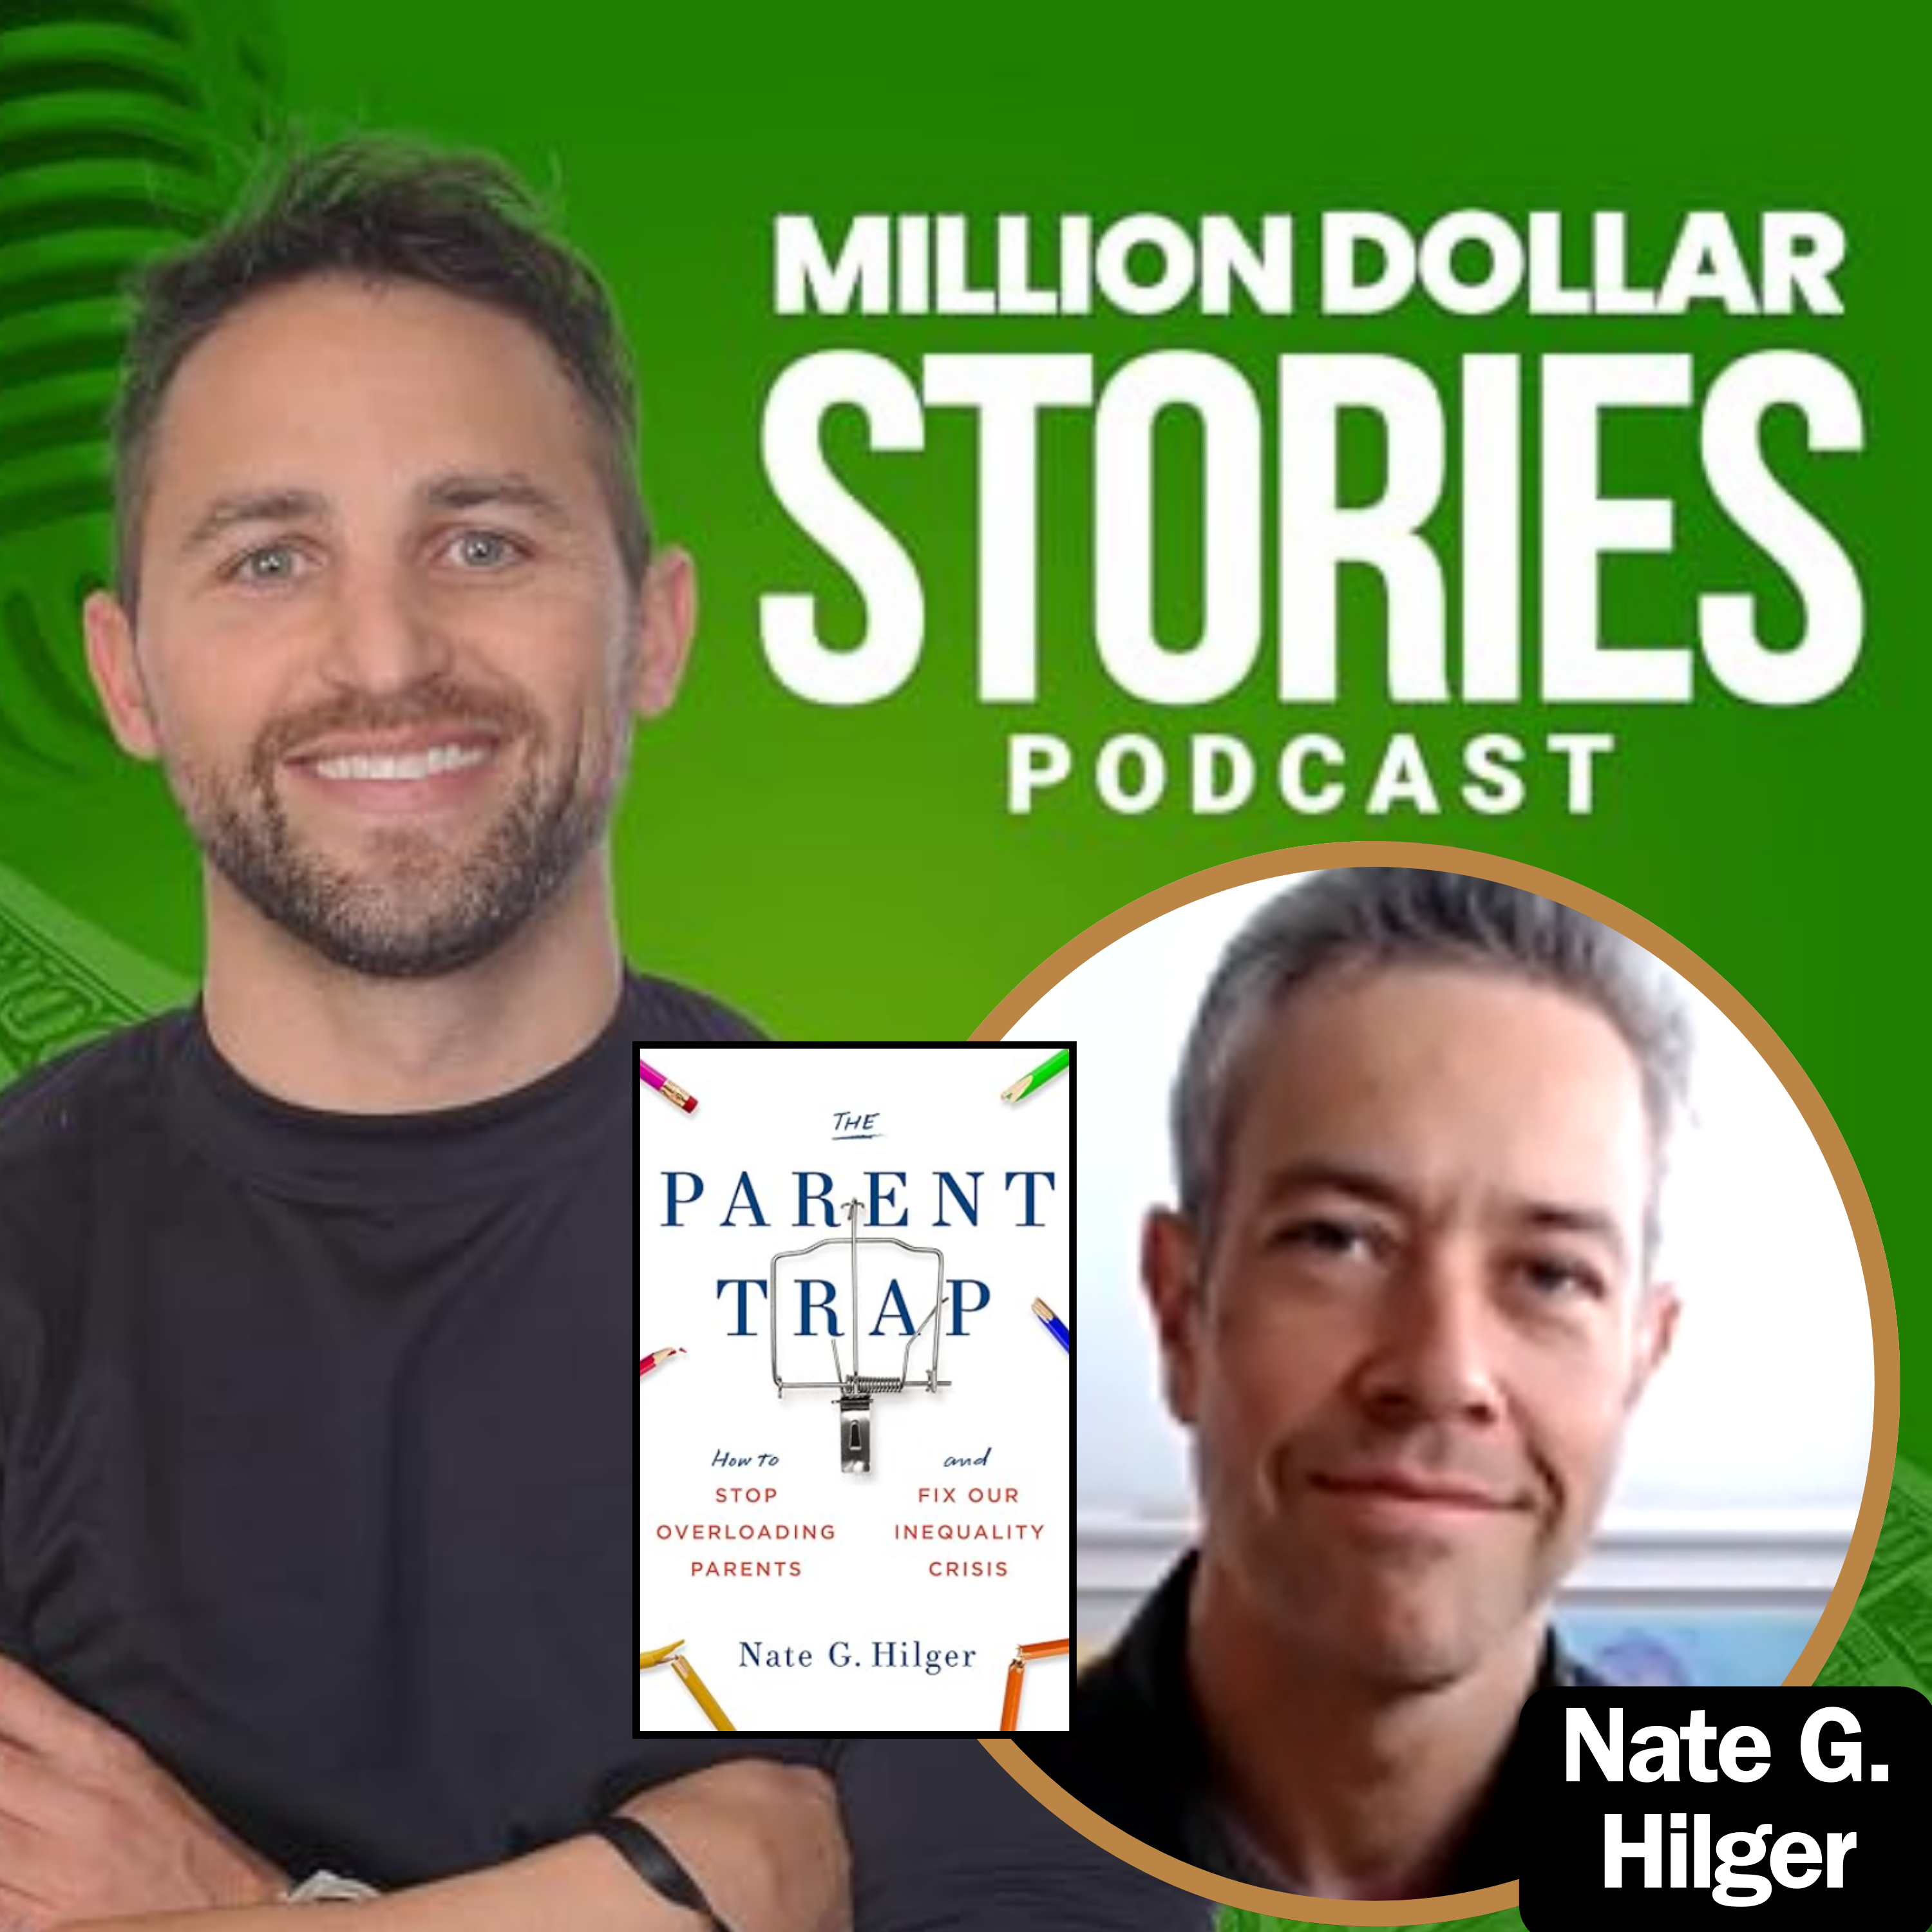 Nate G. Hilger – Author of “The Parent Trap: How to Stop Overloading Parents and Fix Our Inequality Crisis”